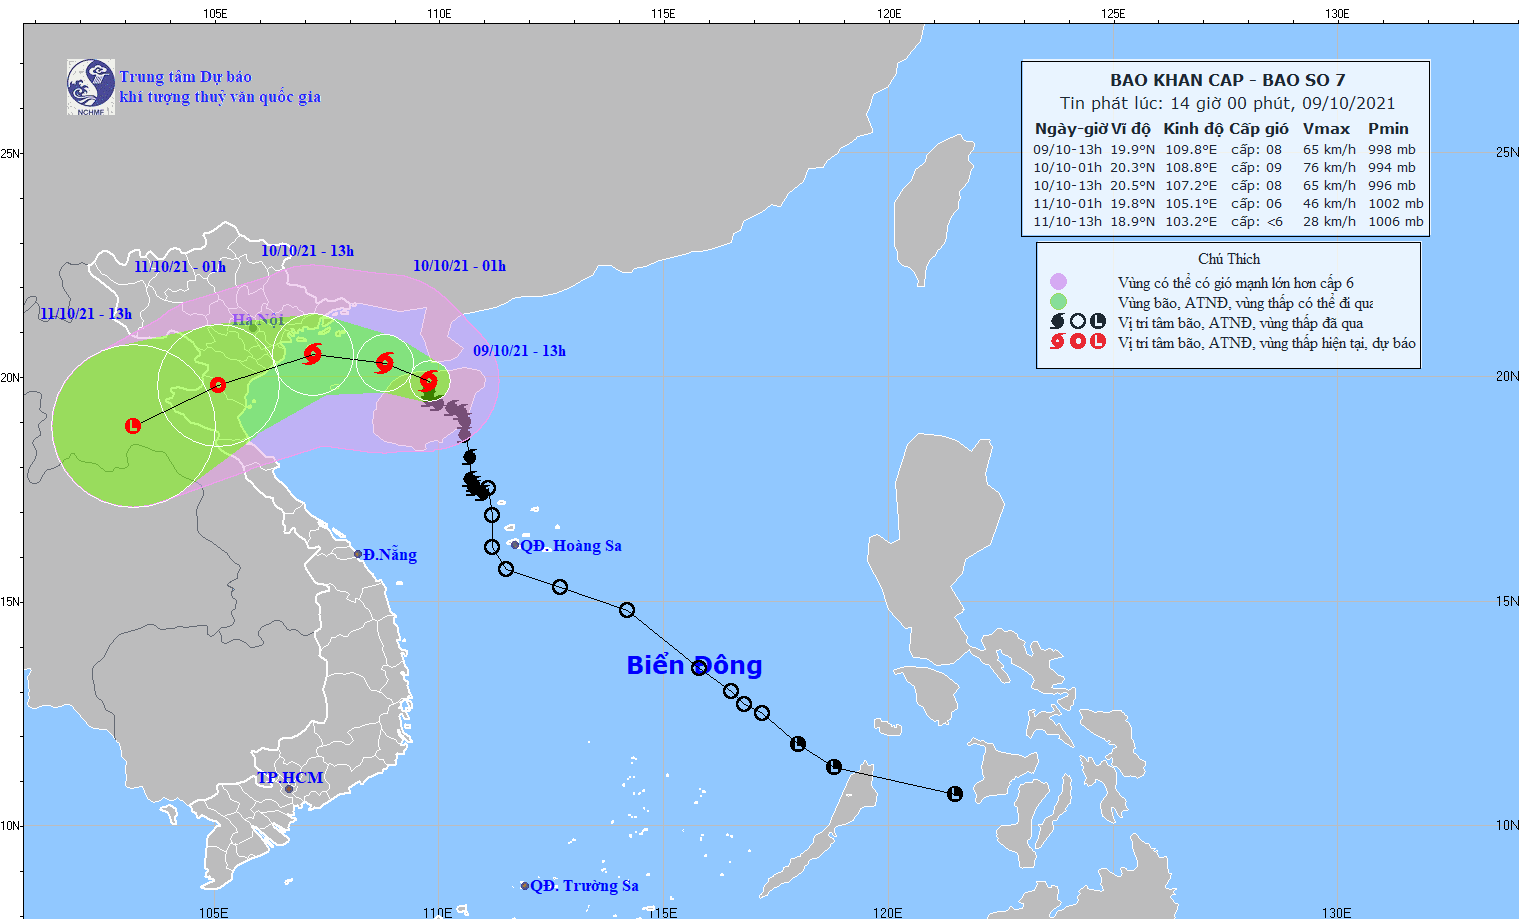 Storm Lionrock likely to weaken into depression before hitting Vietnam